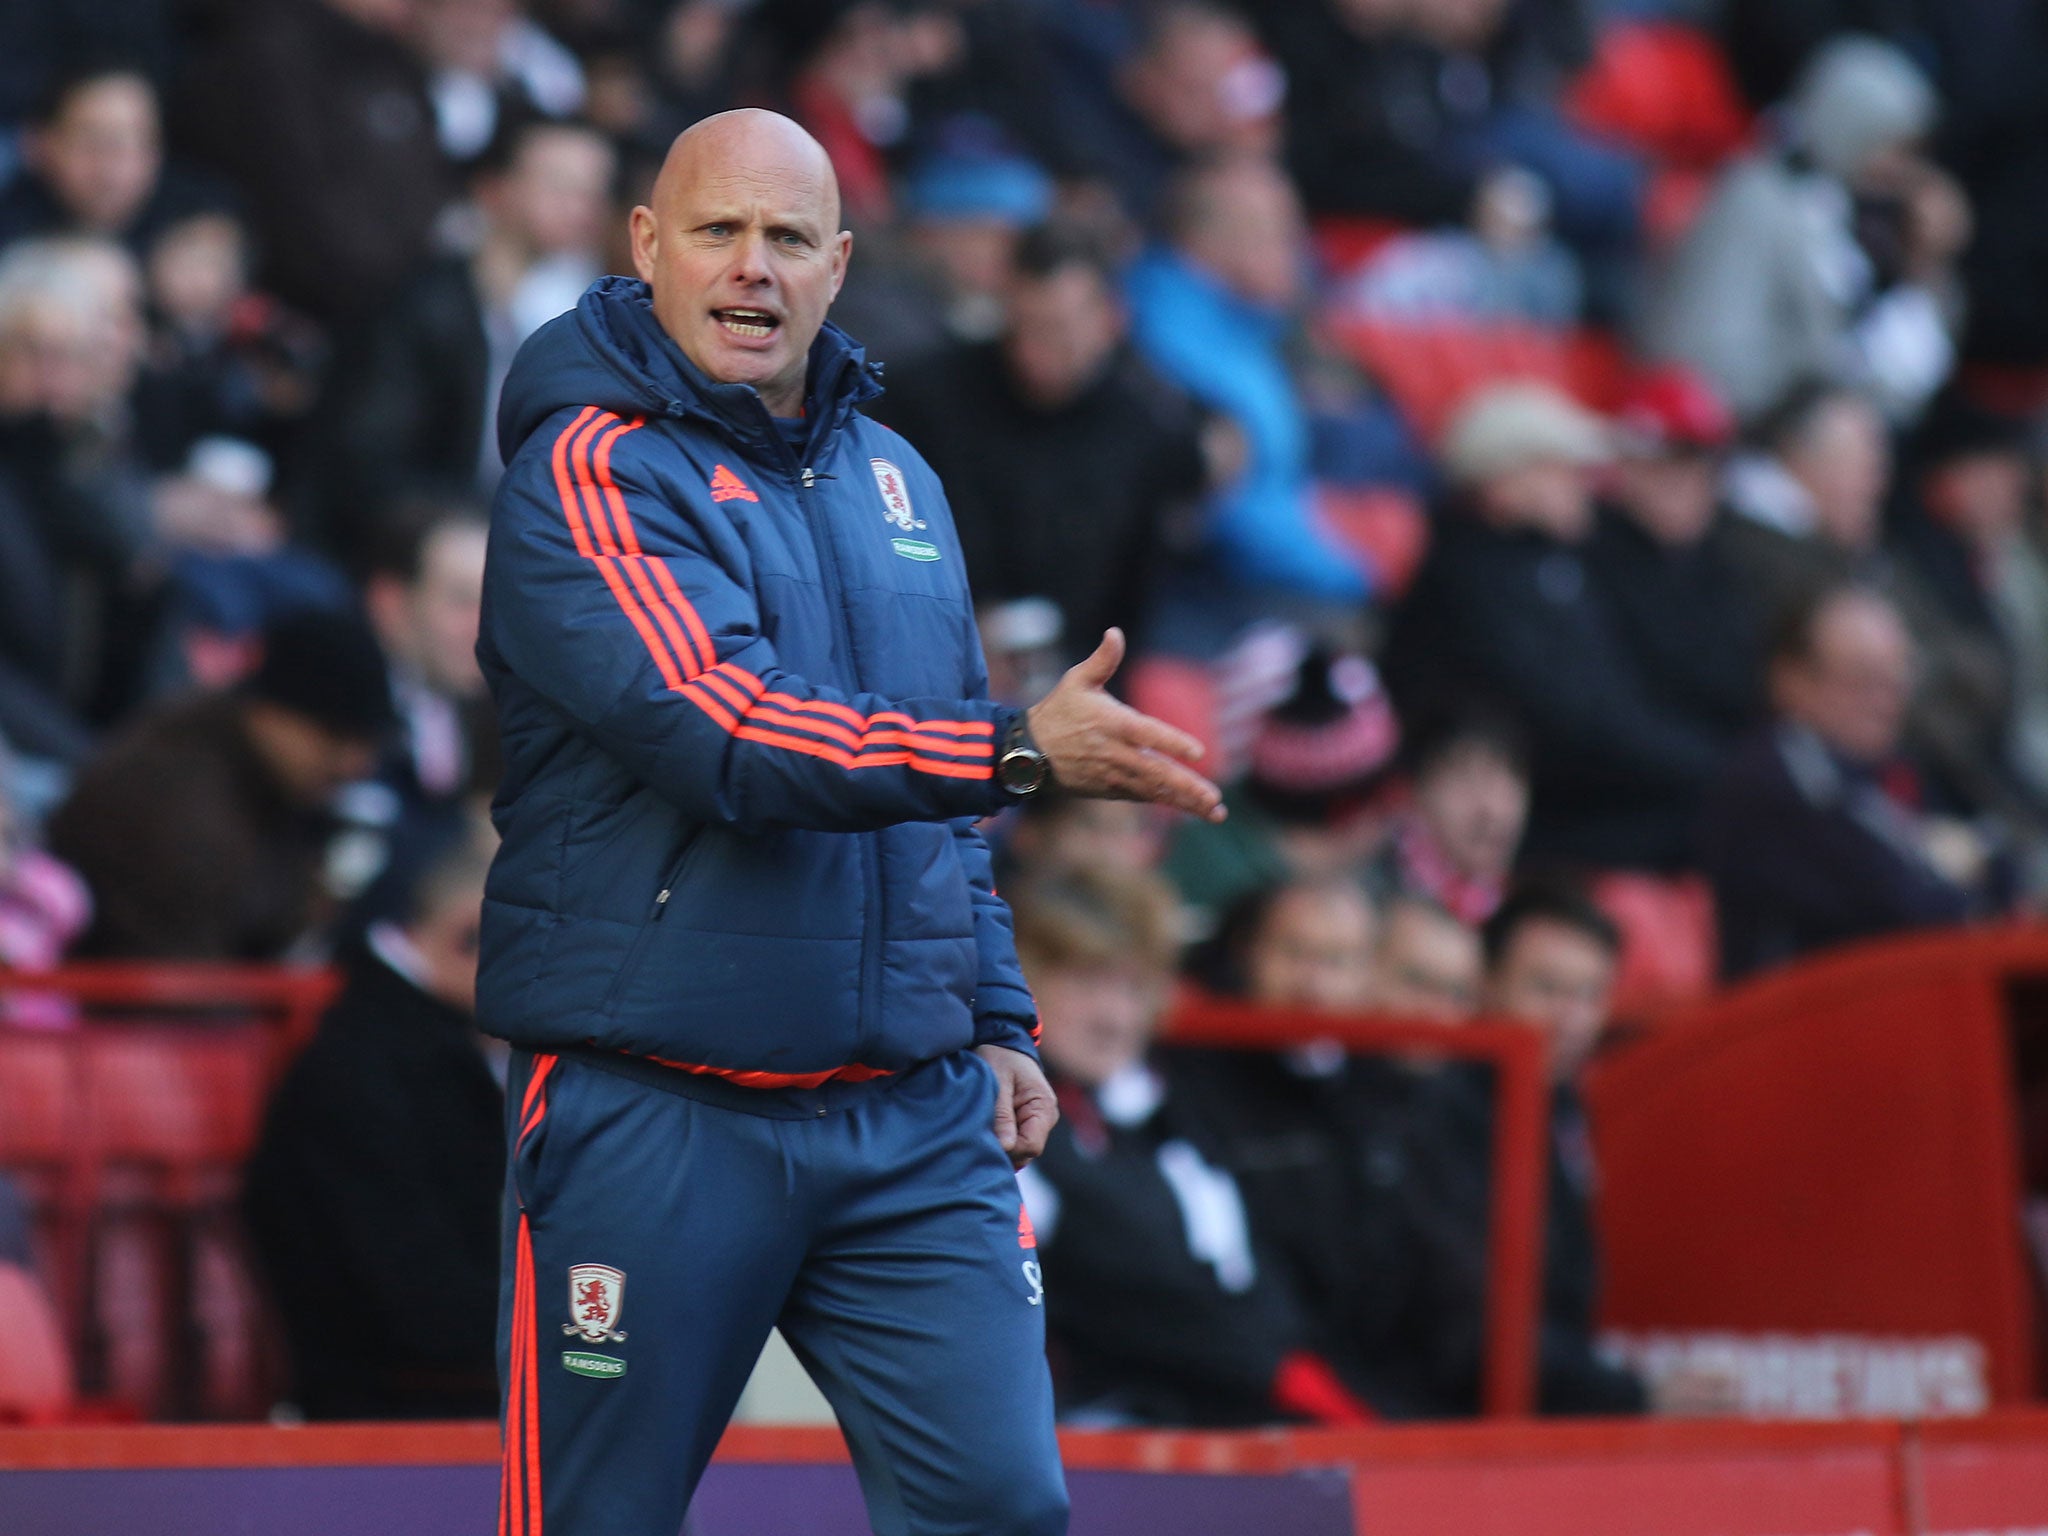 Steve Agnew oversaw Boro’s defeat at The Valley